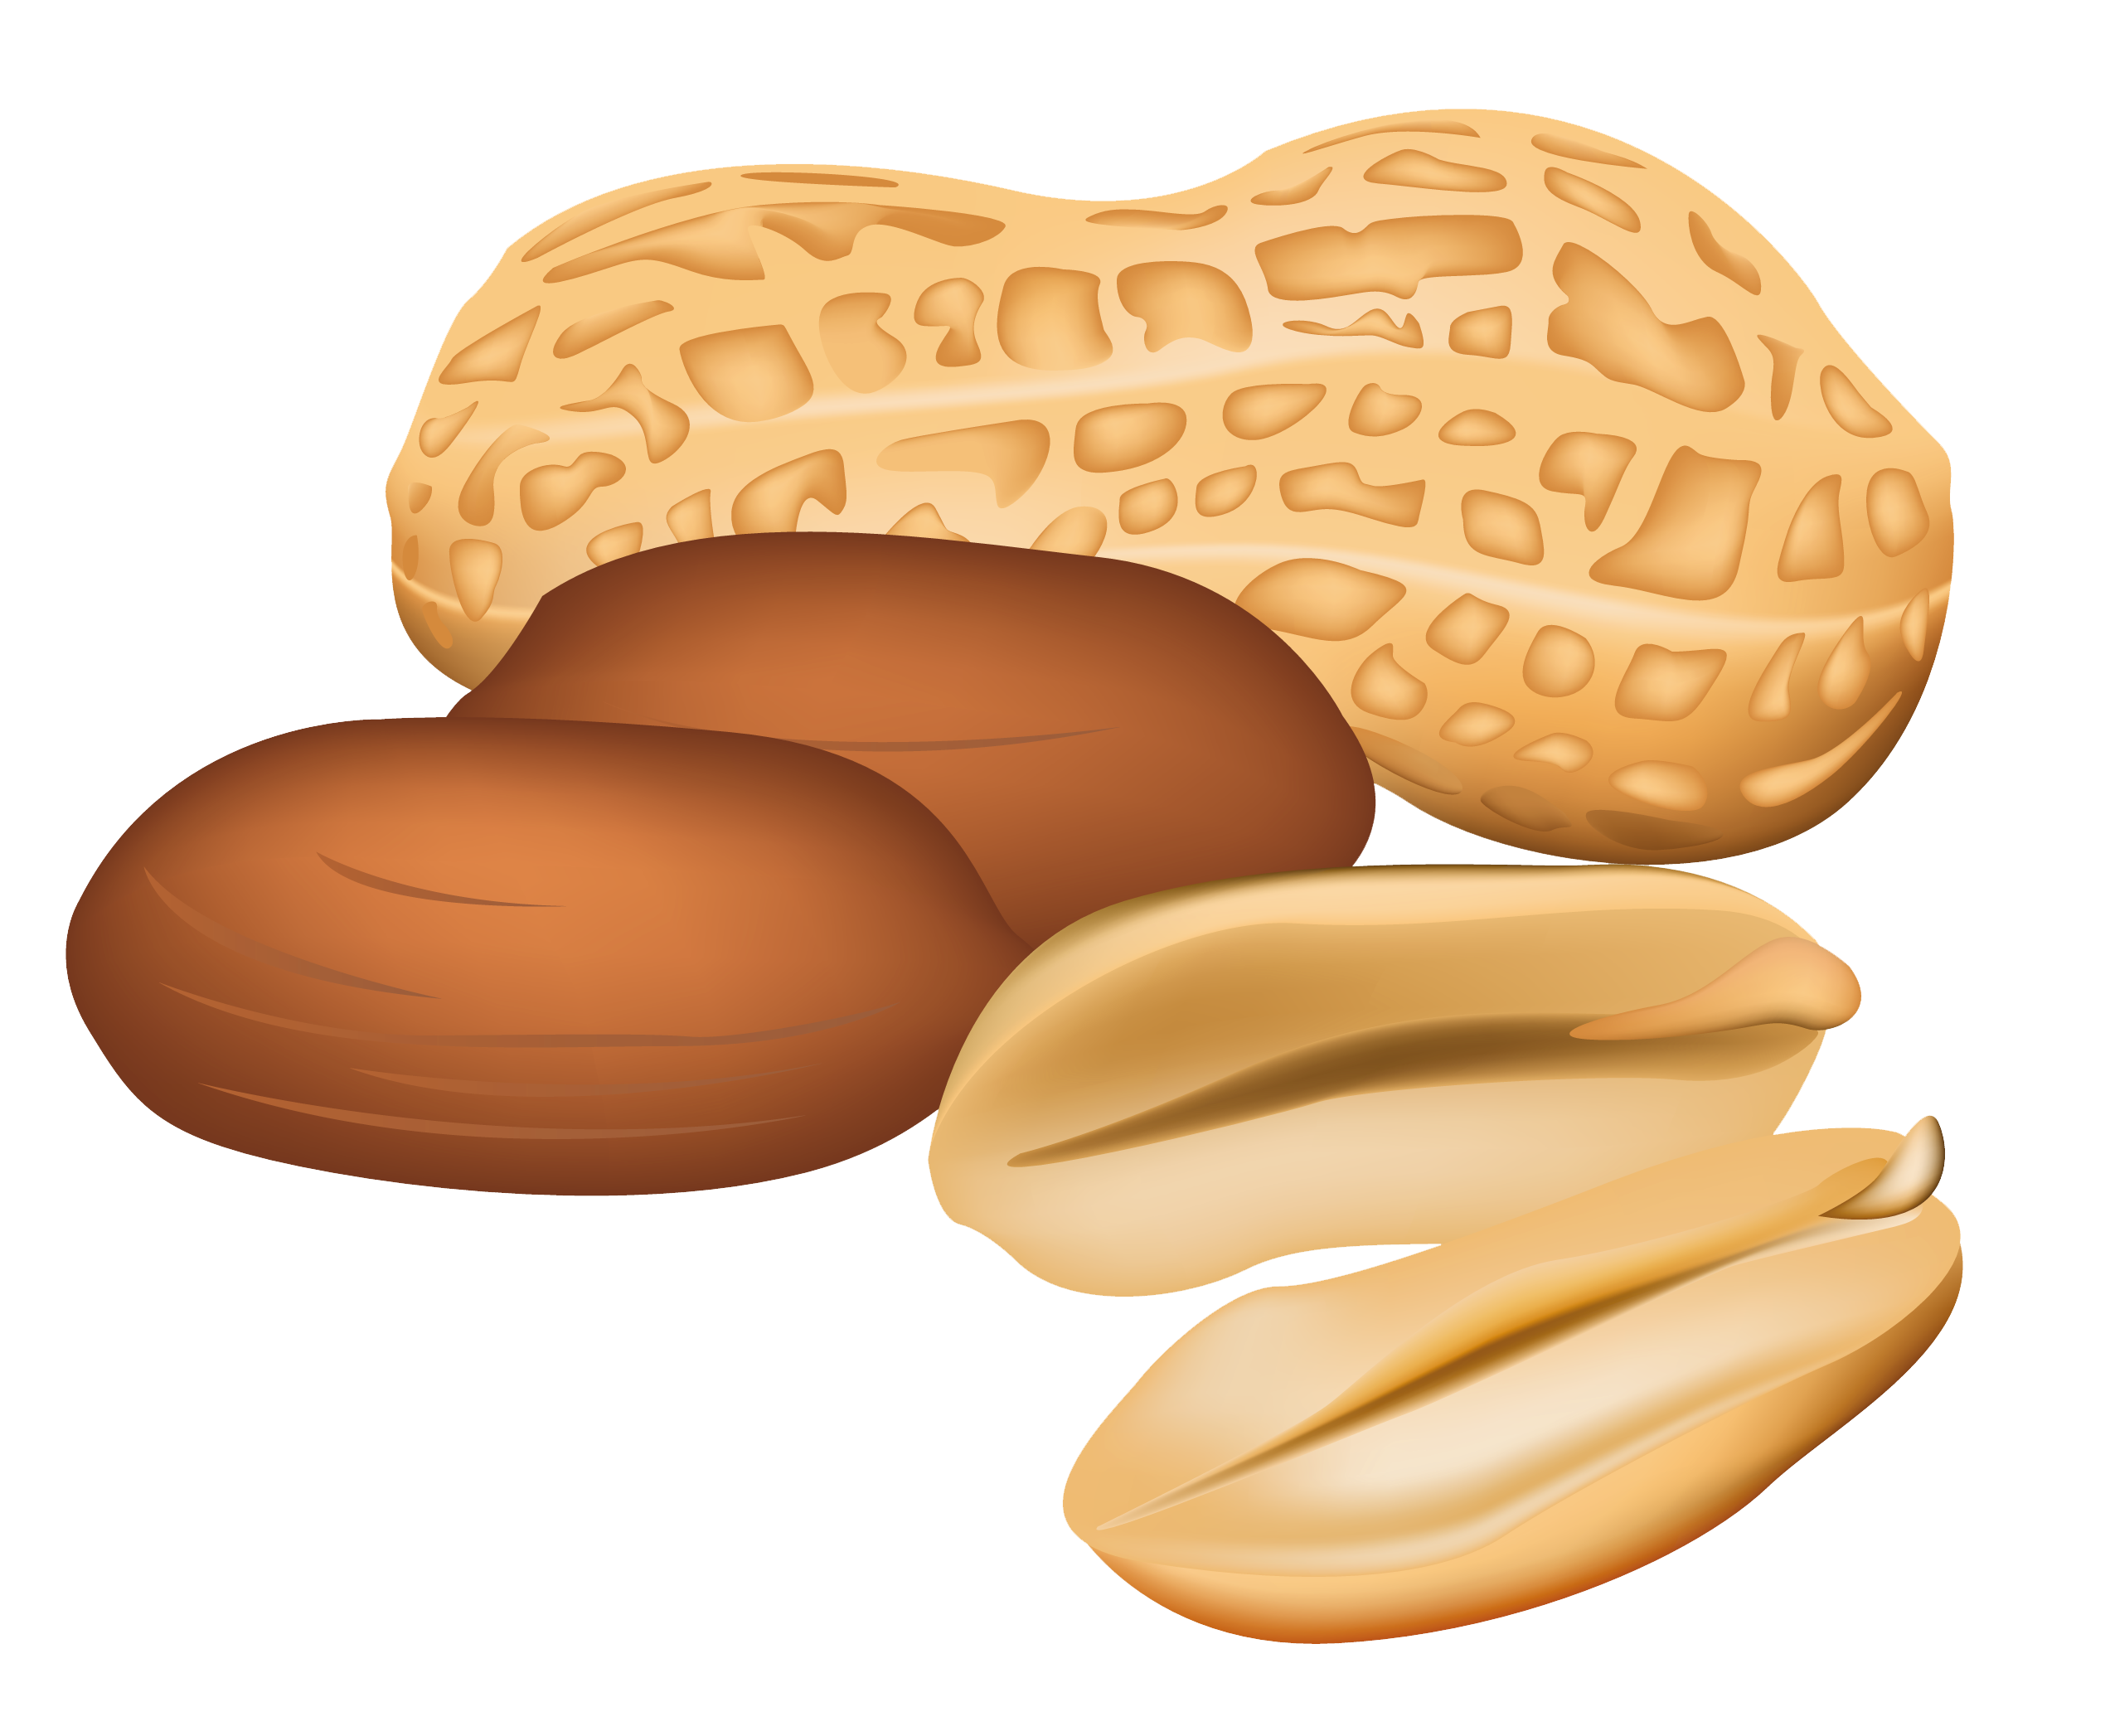 Free nuts cliparts download. Wednesday clipart peanuts